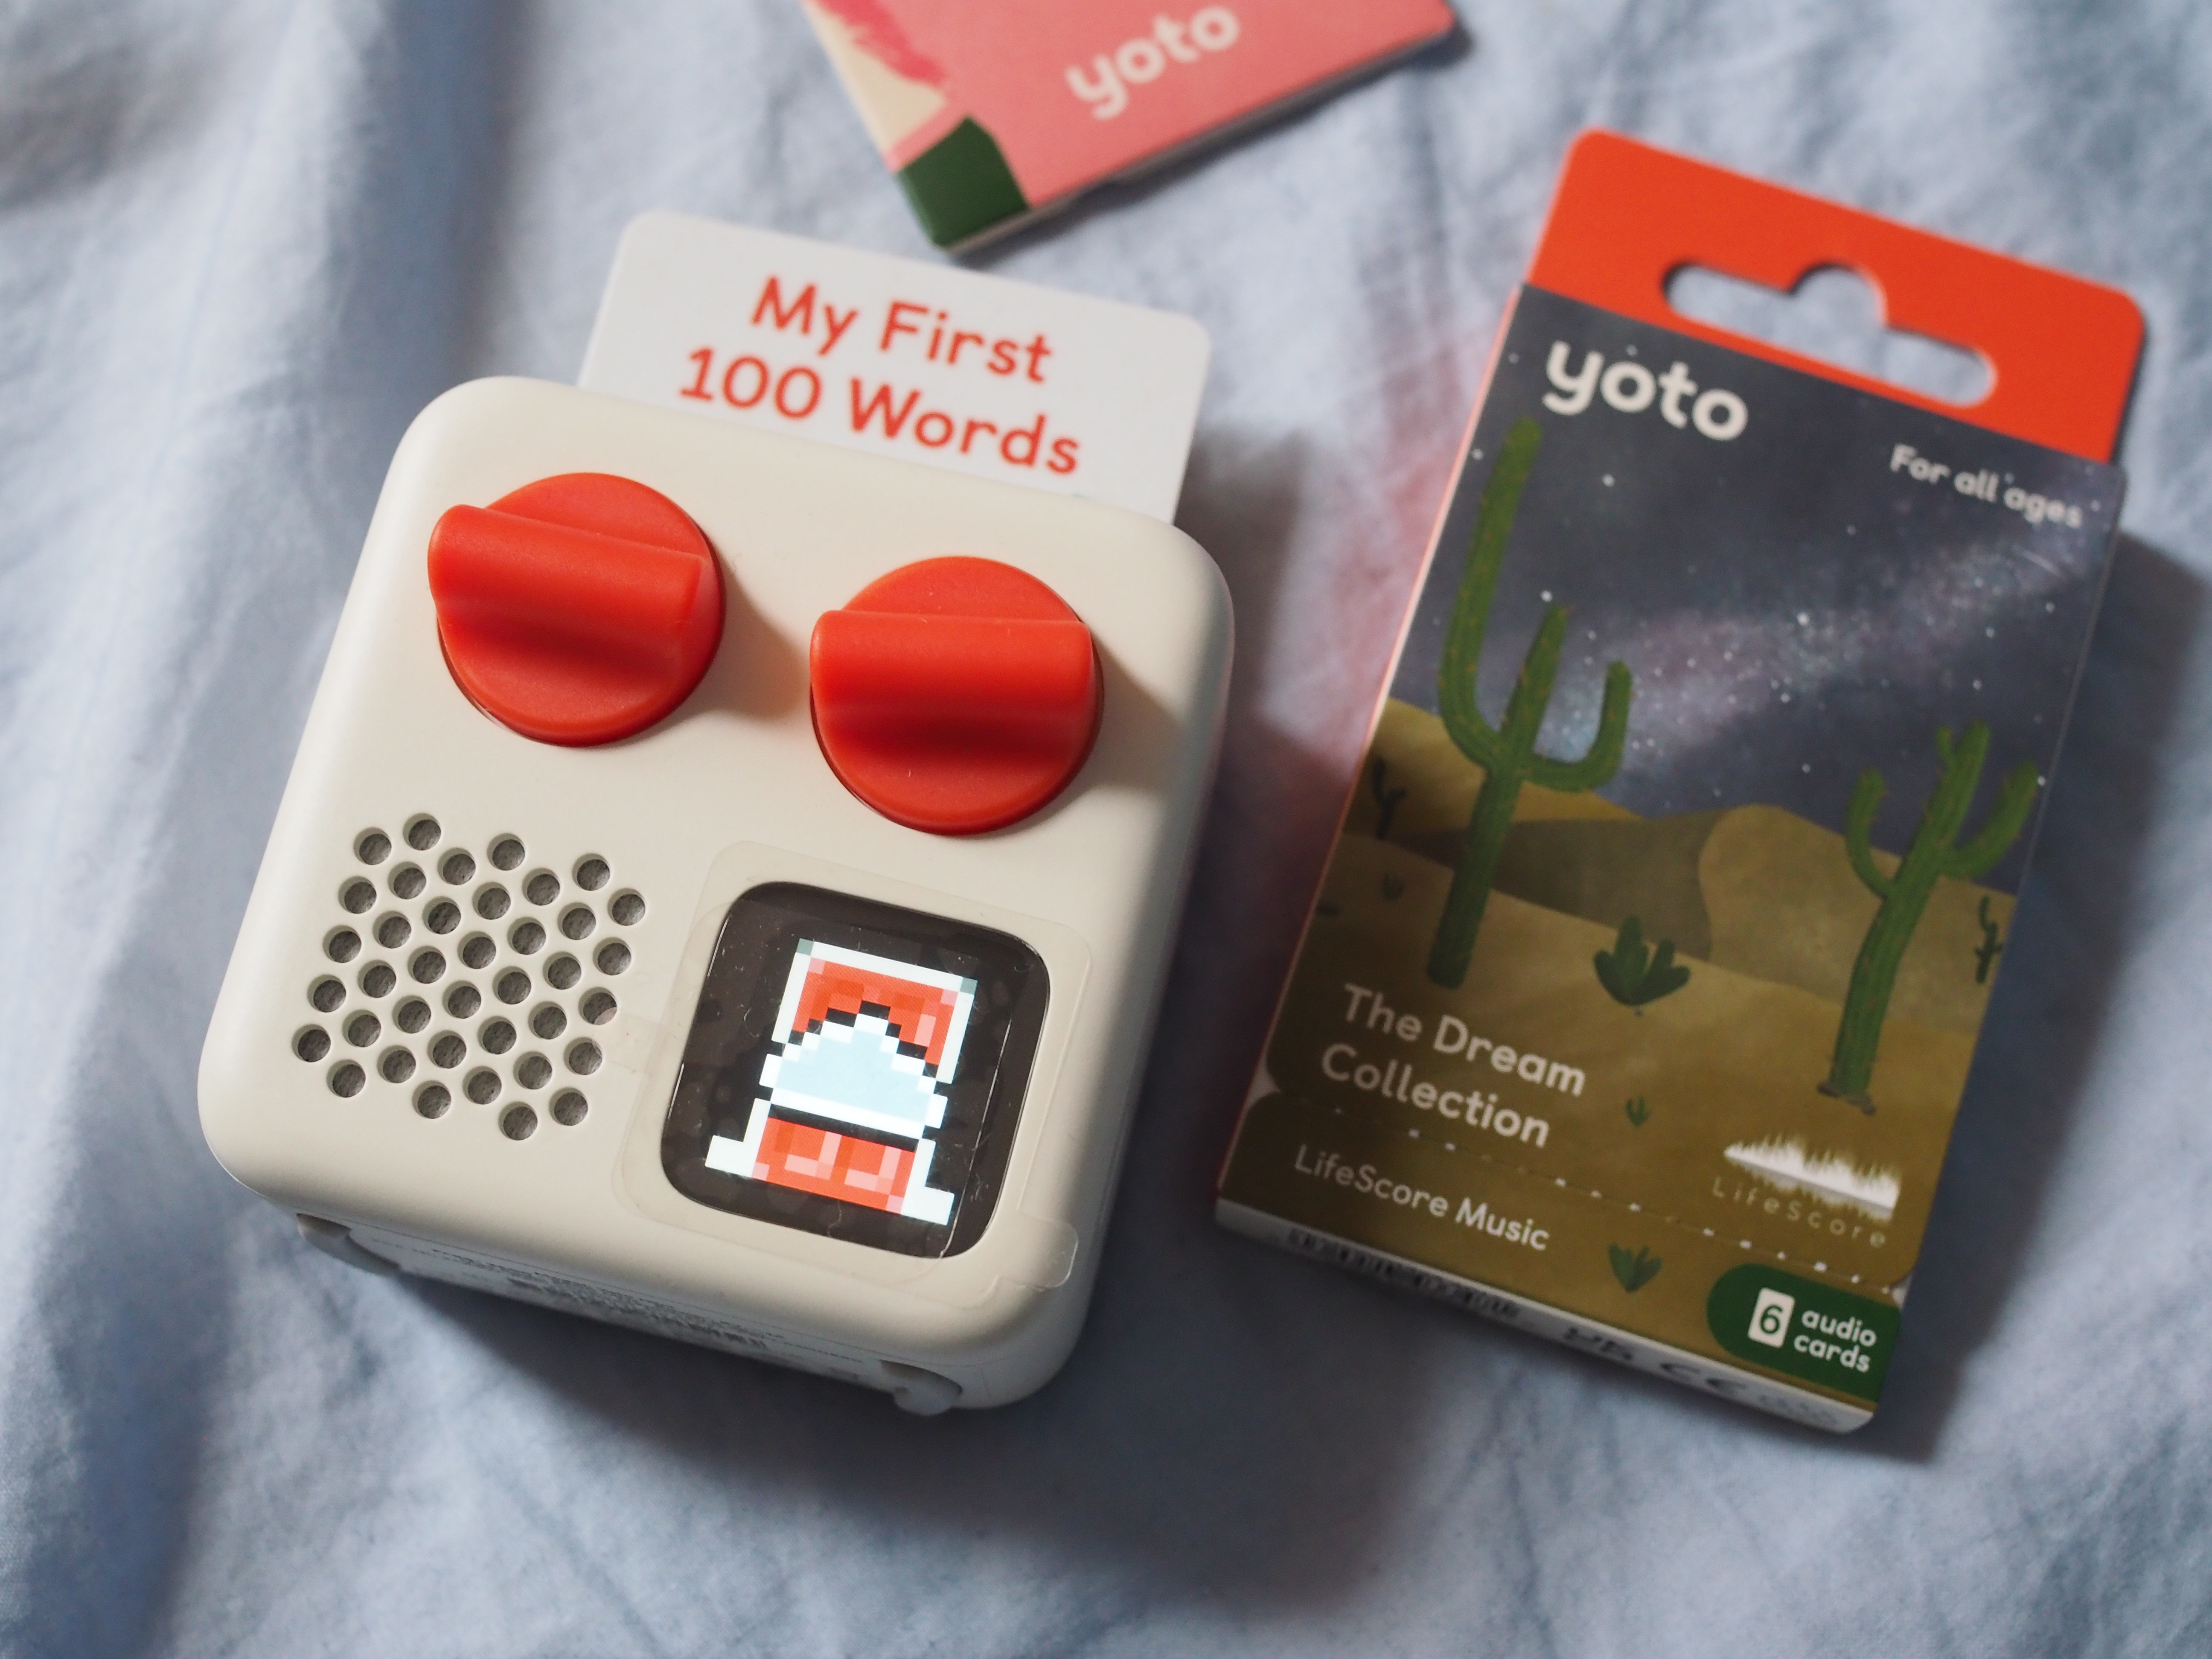 Yoto player mini review and 5% discount code